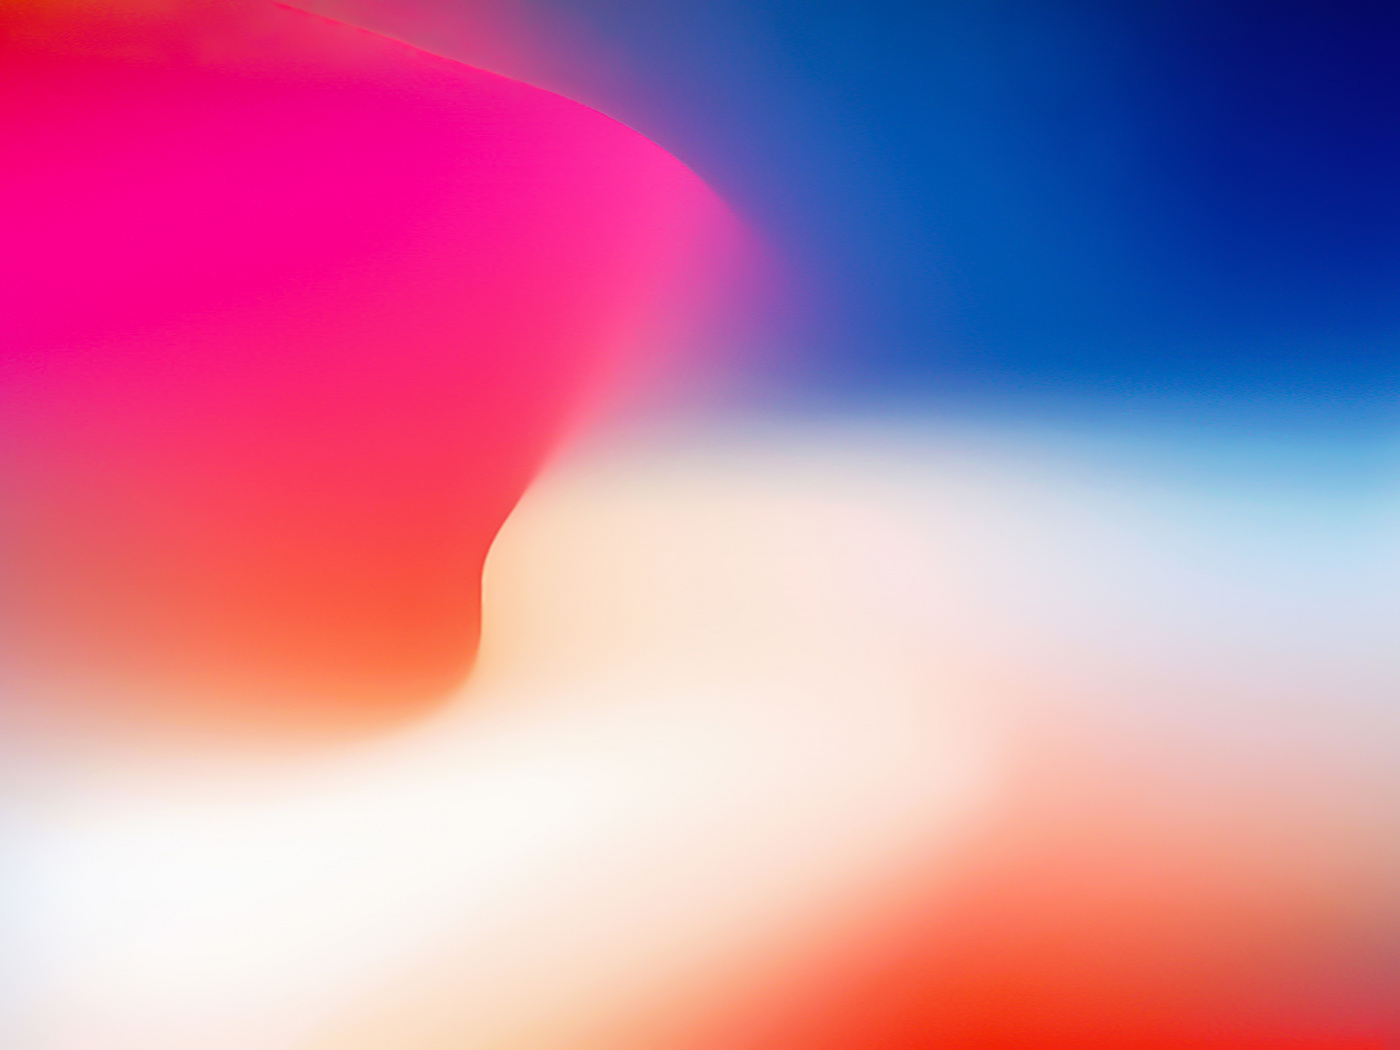 Iphone X, Stock, Colorful Gradient, Abstract, Wallpaper - Iphone X No Notch - HD Wallpaper 